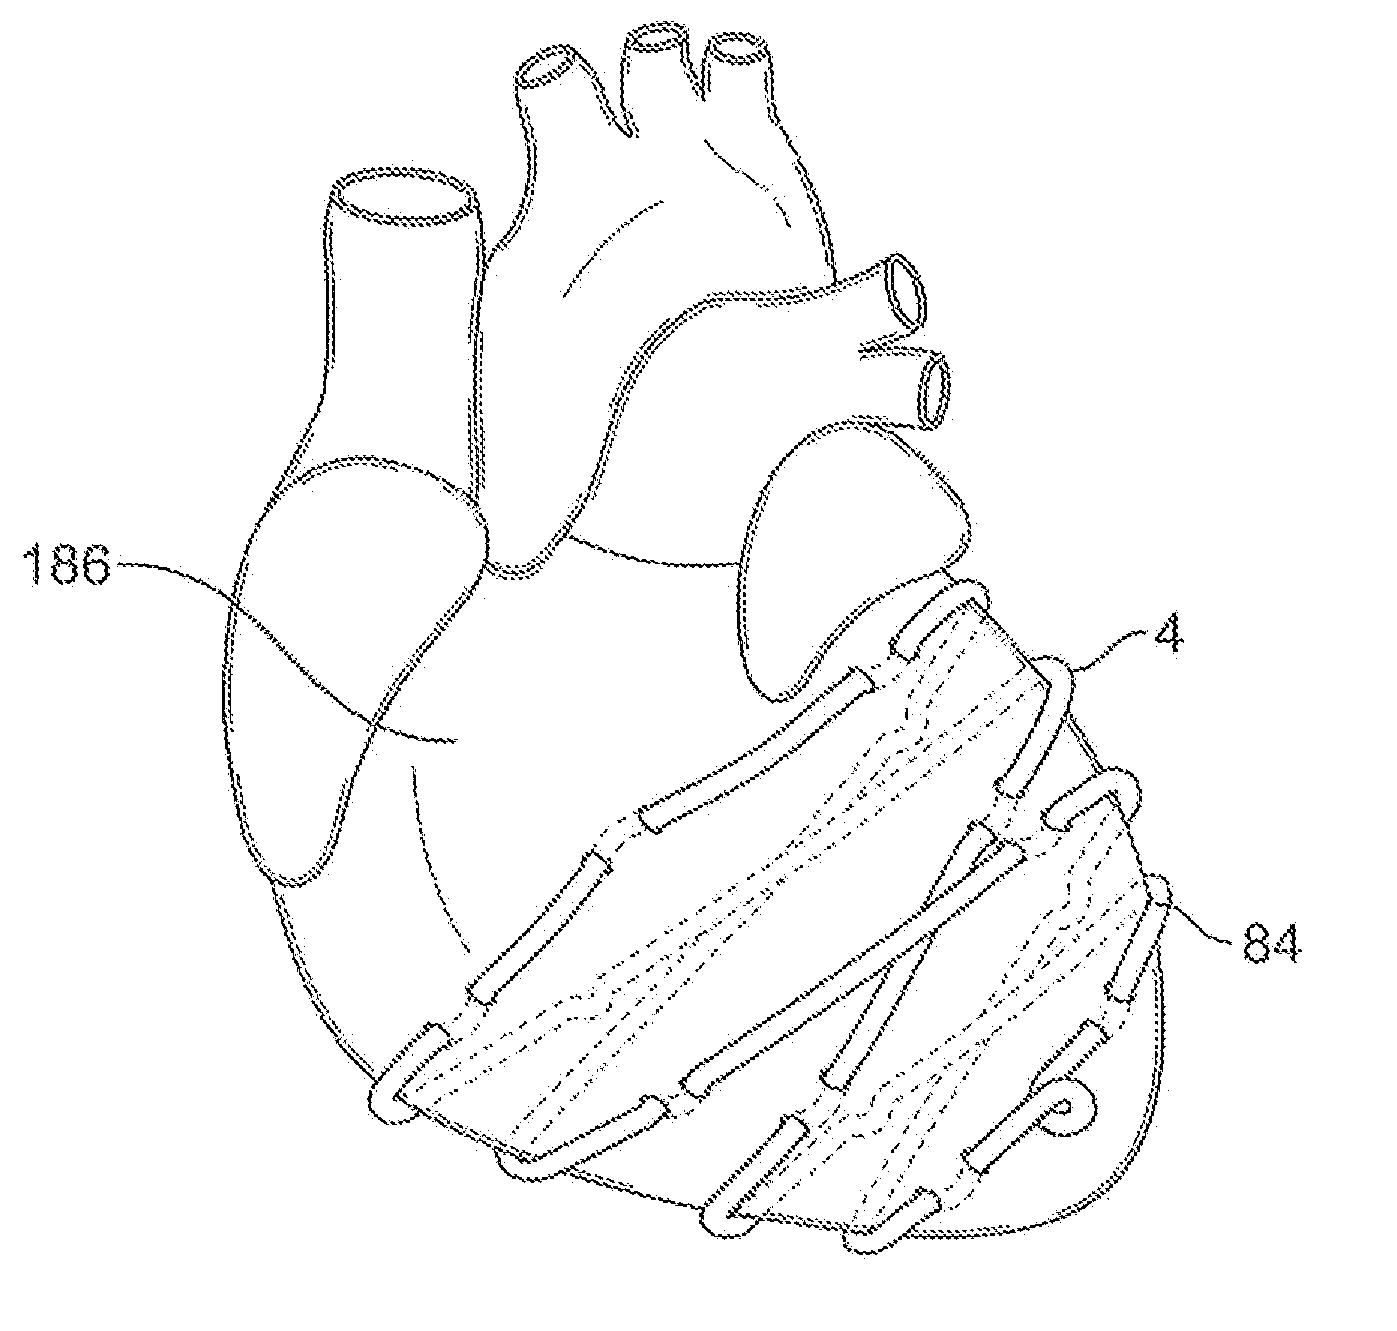 Systems for heart treatment